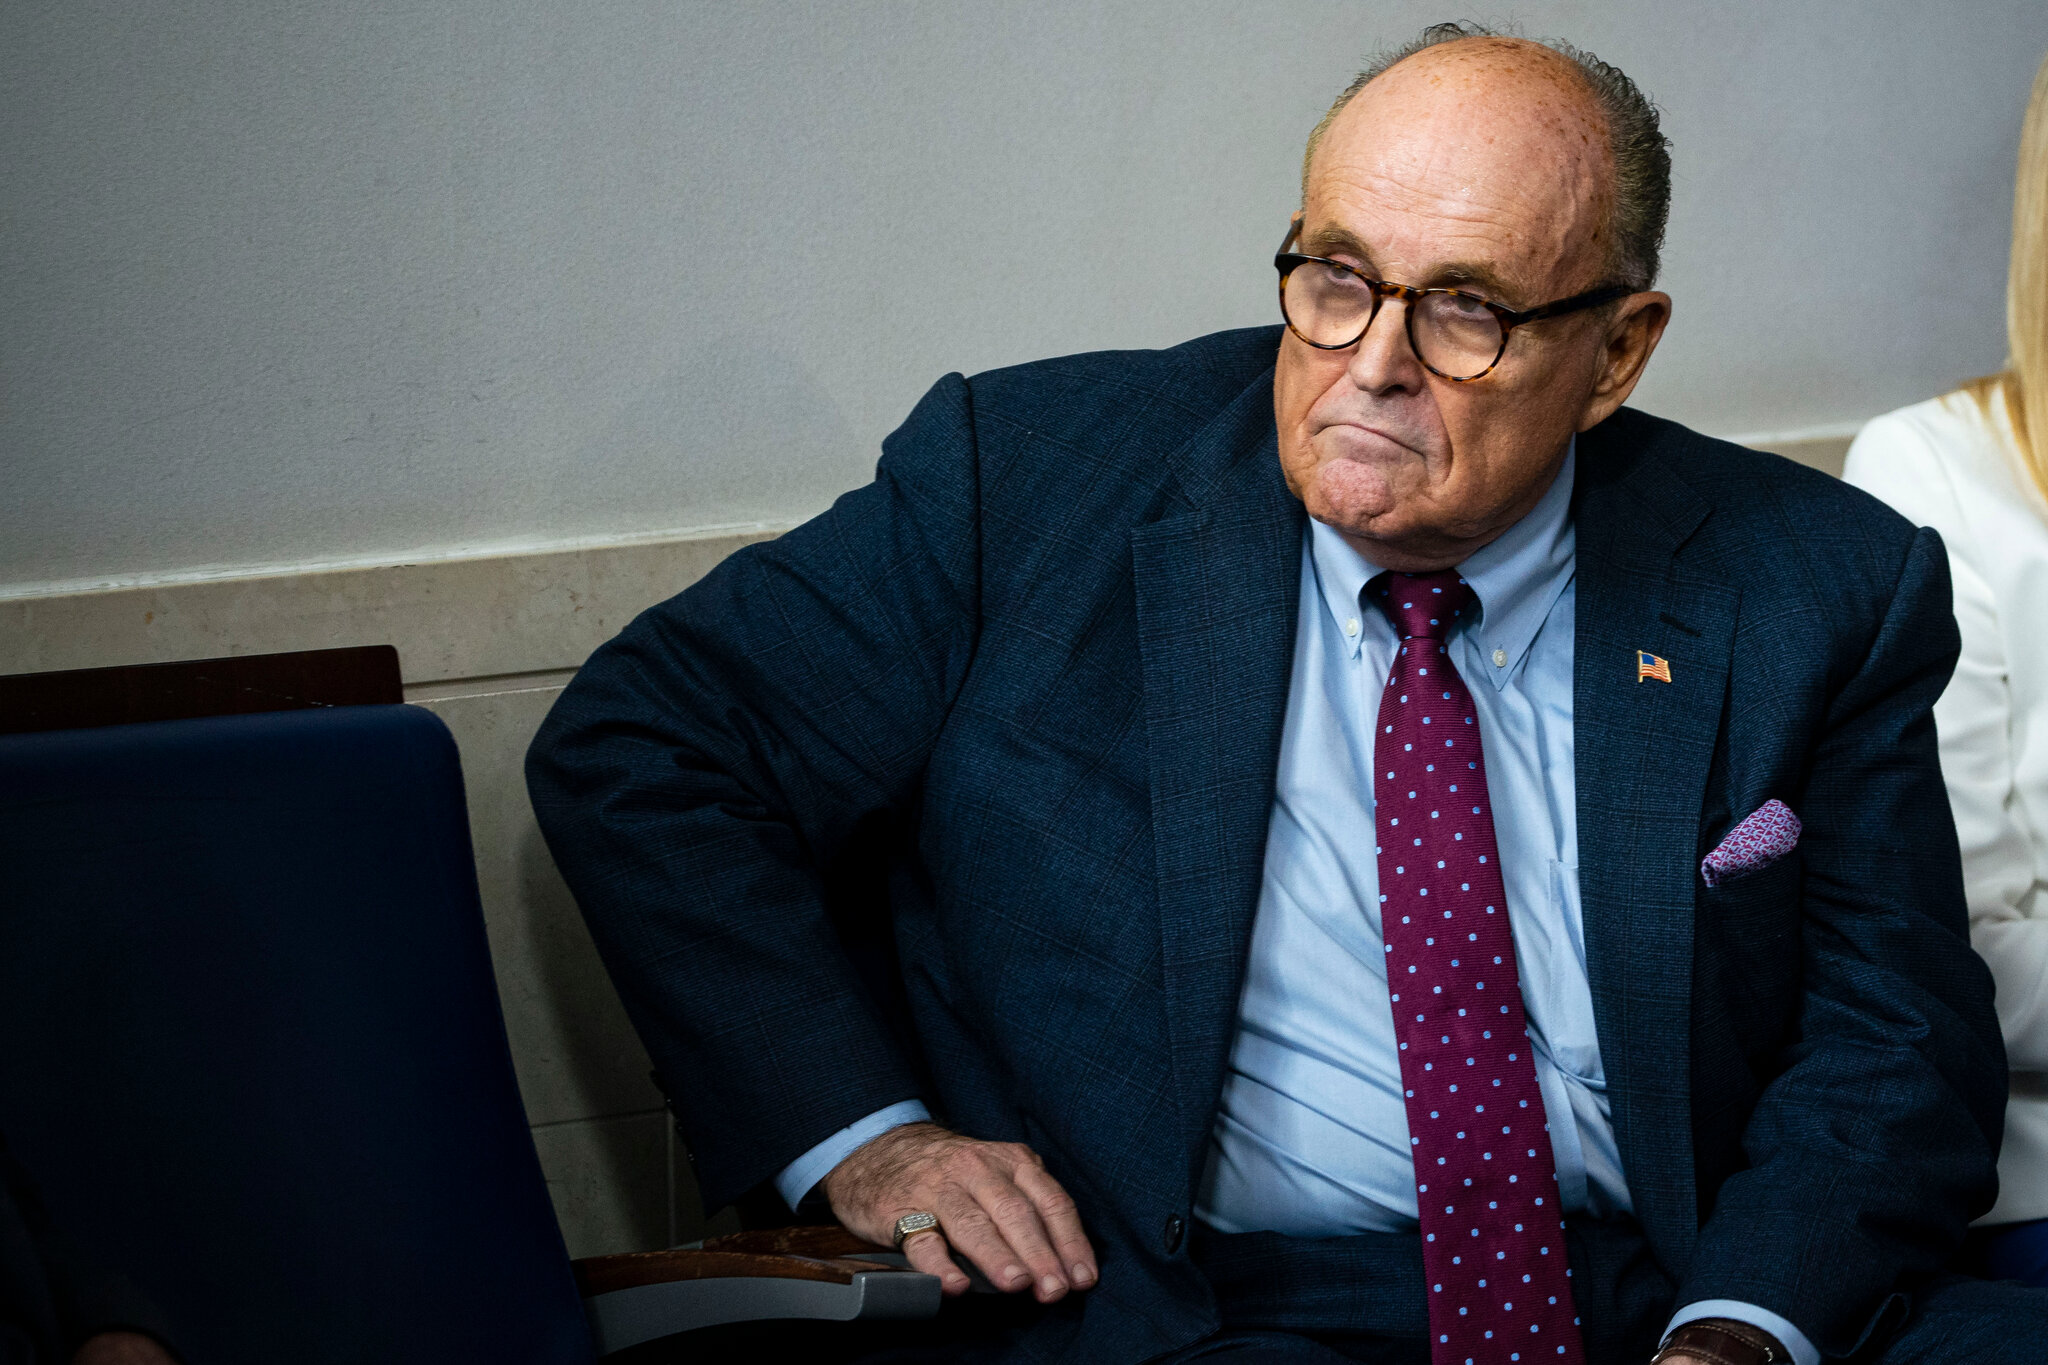 Rudy Giuliani suspended from practicing law in New York